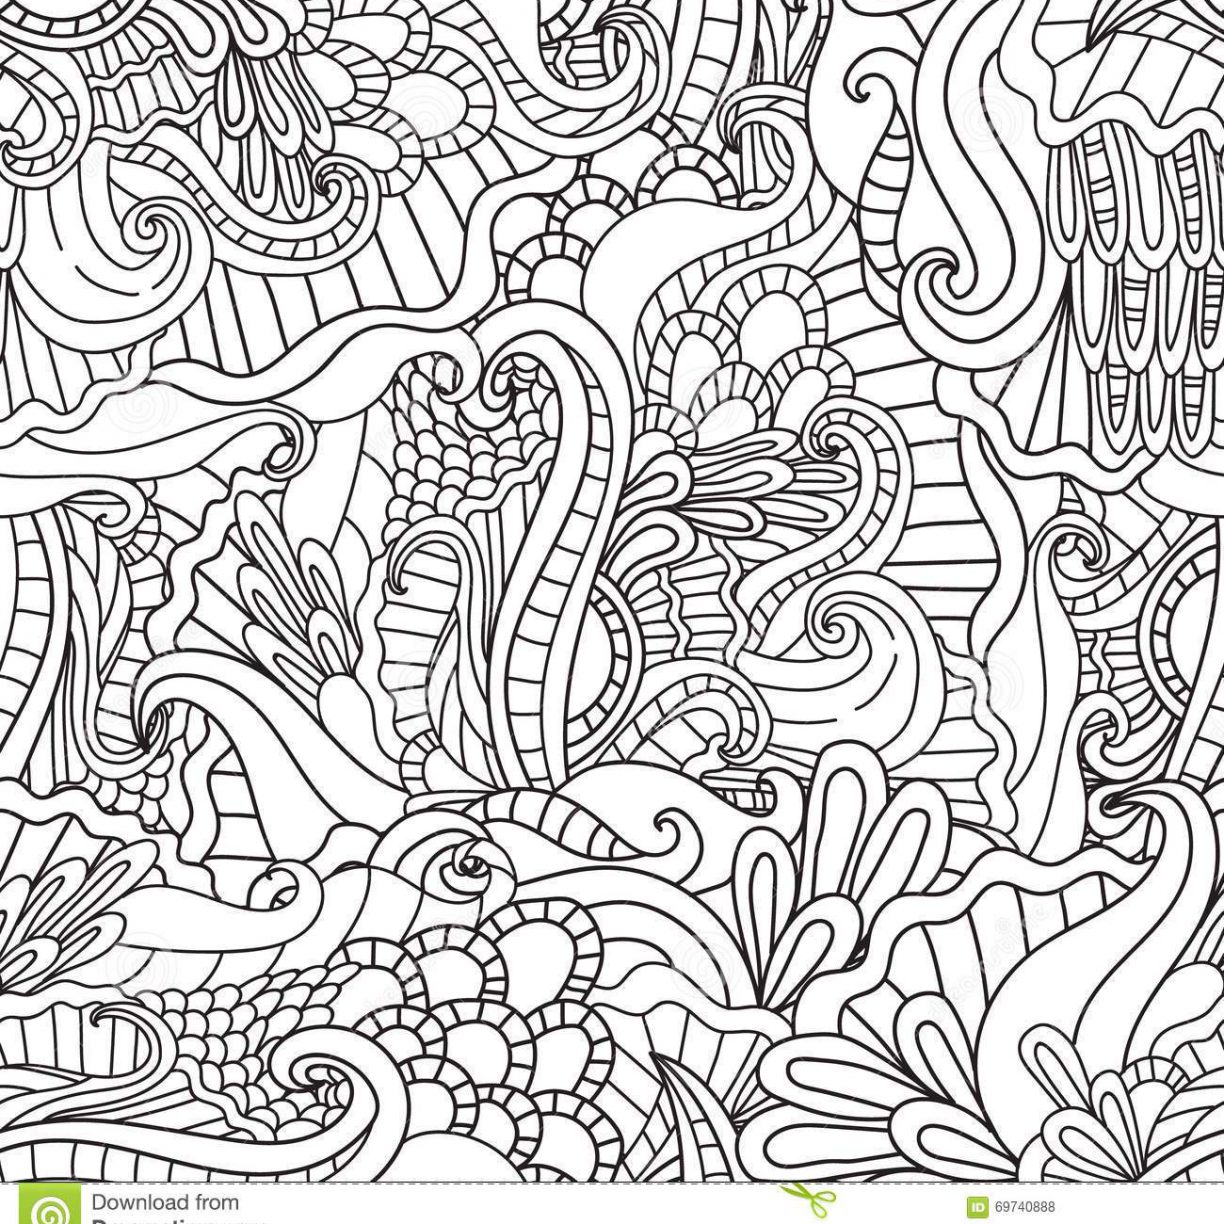 Coloring Pages Nature Scenes at GetColorings.com   Free printable ...